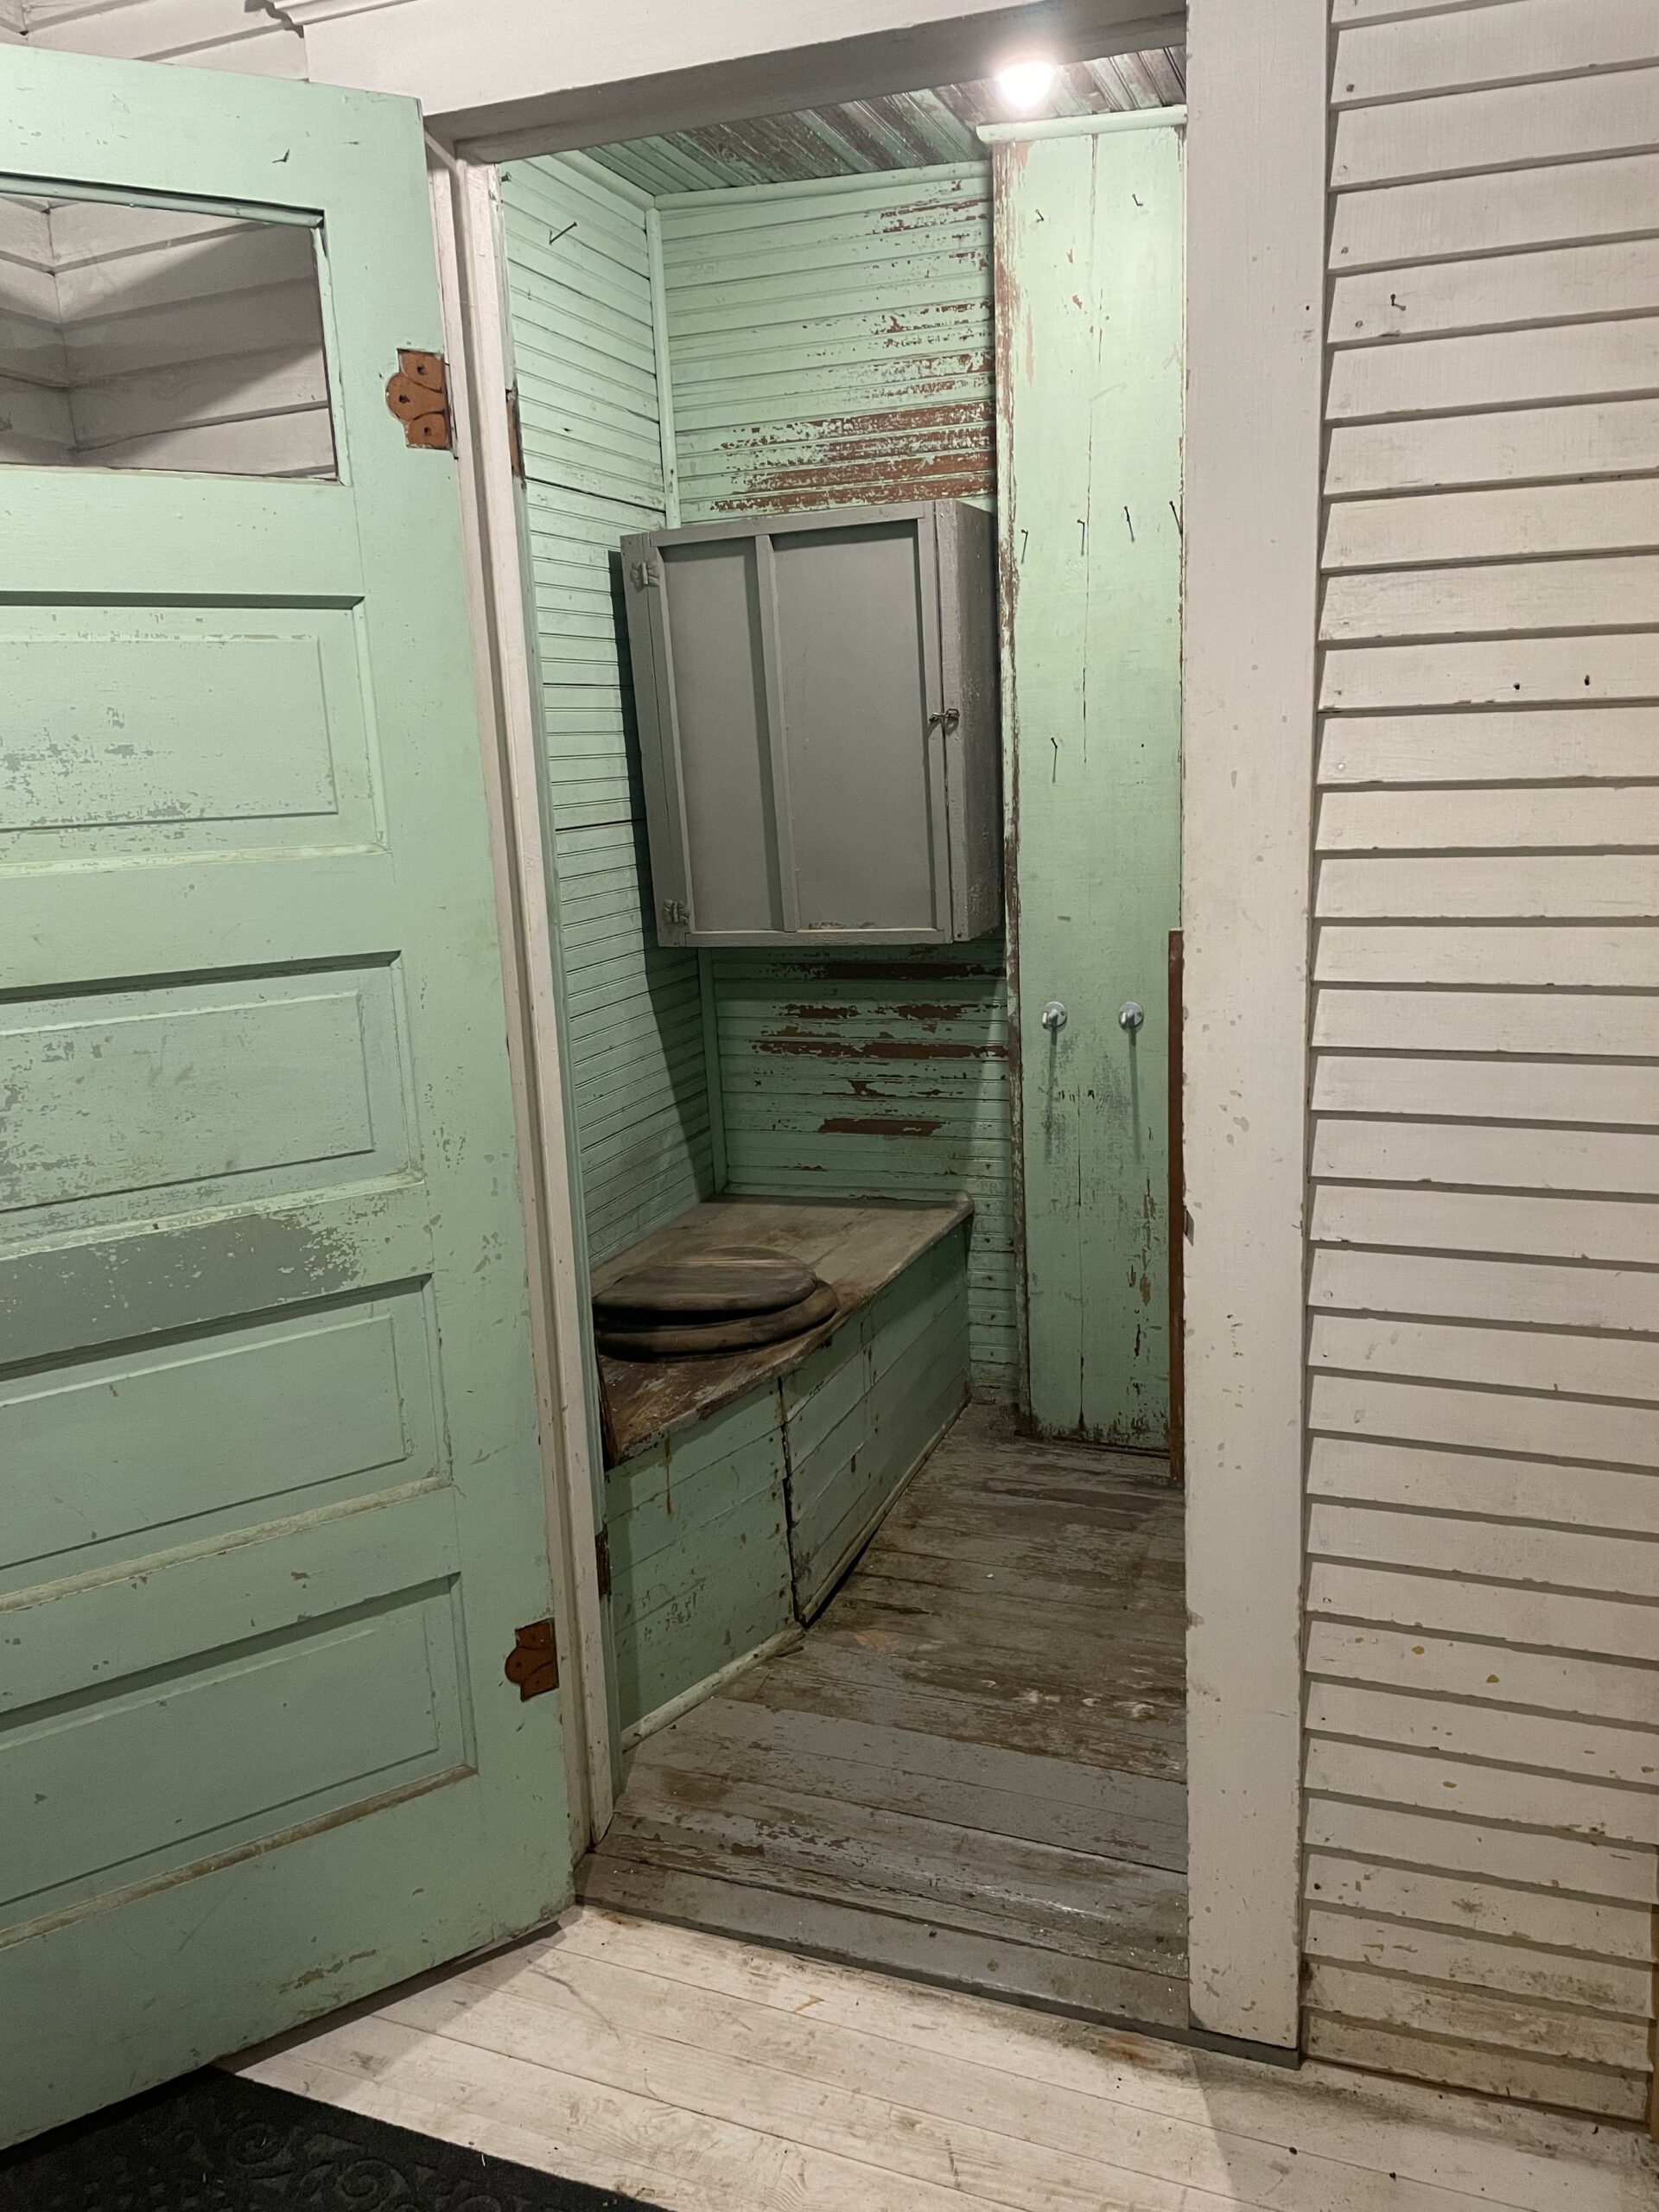 An indoor outhouse in a 1909 home